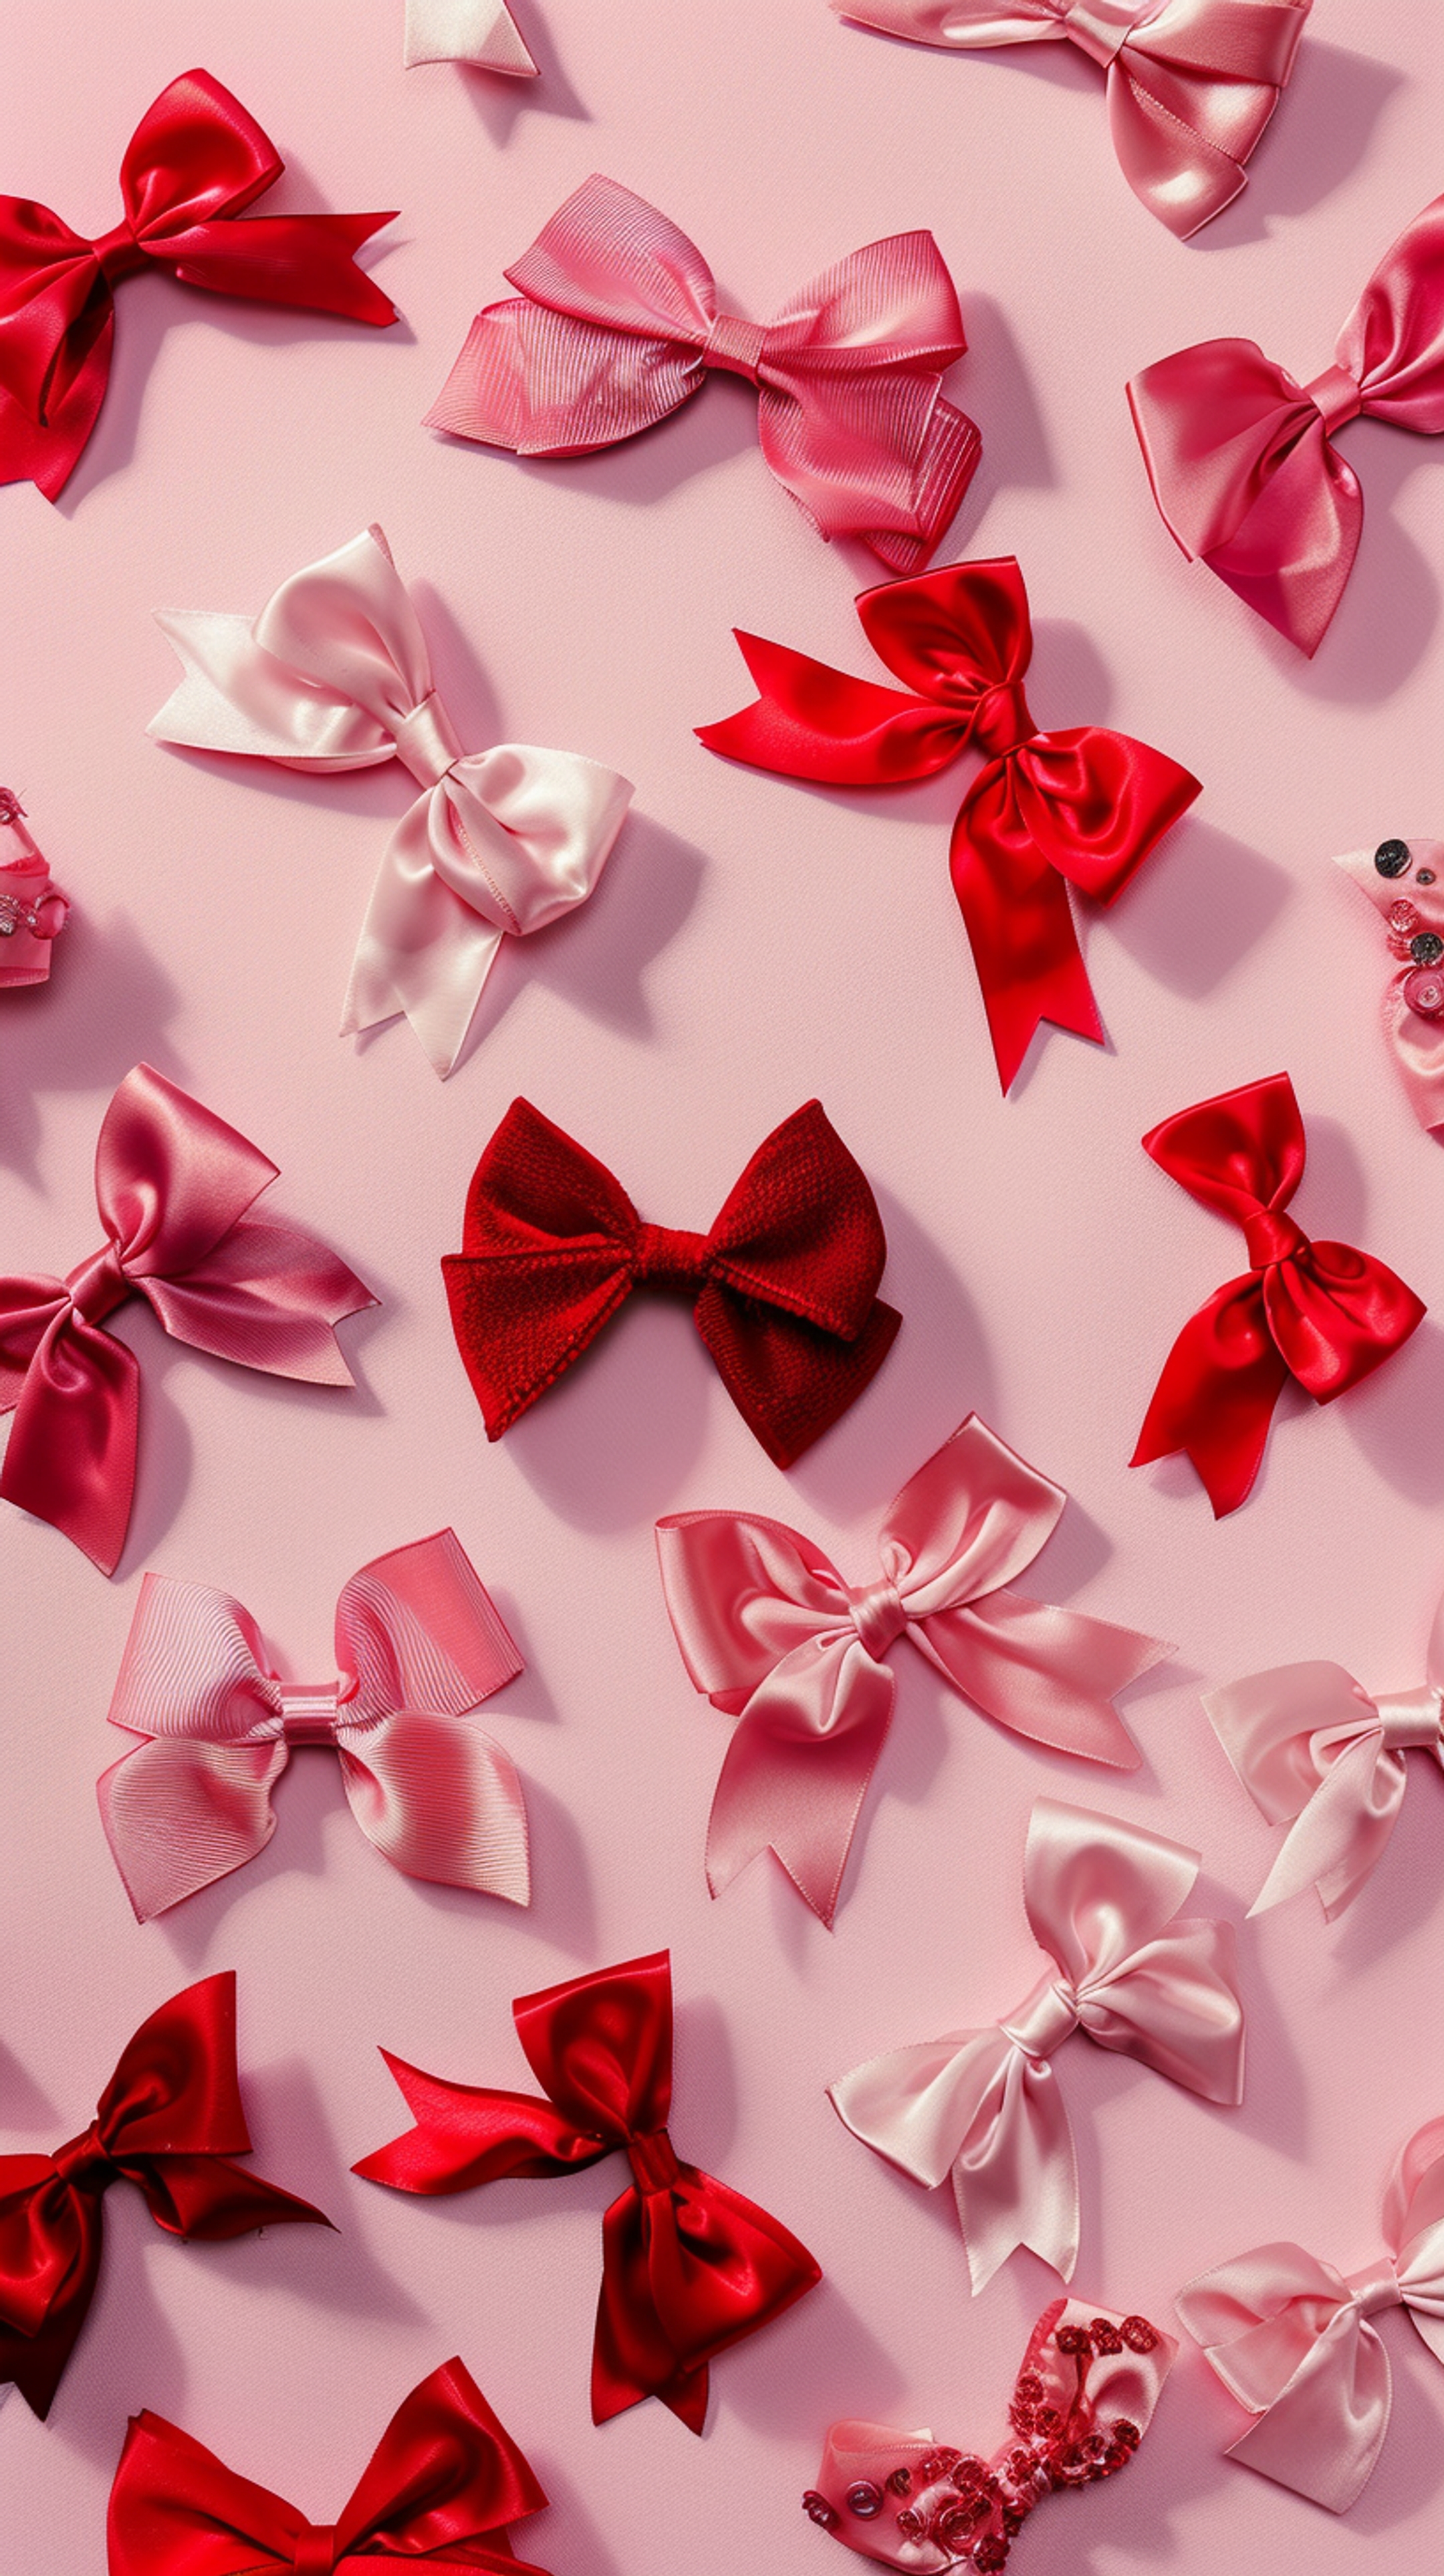 Pretty Pink Bows for Your Screen Tapeta[b7a269512d7d4883b181]